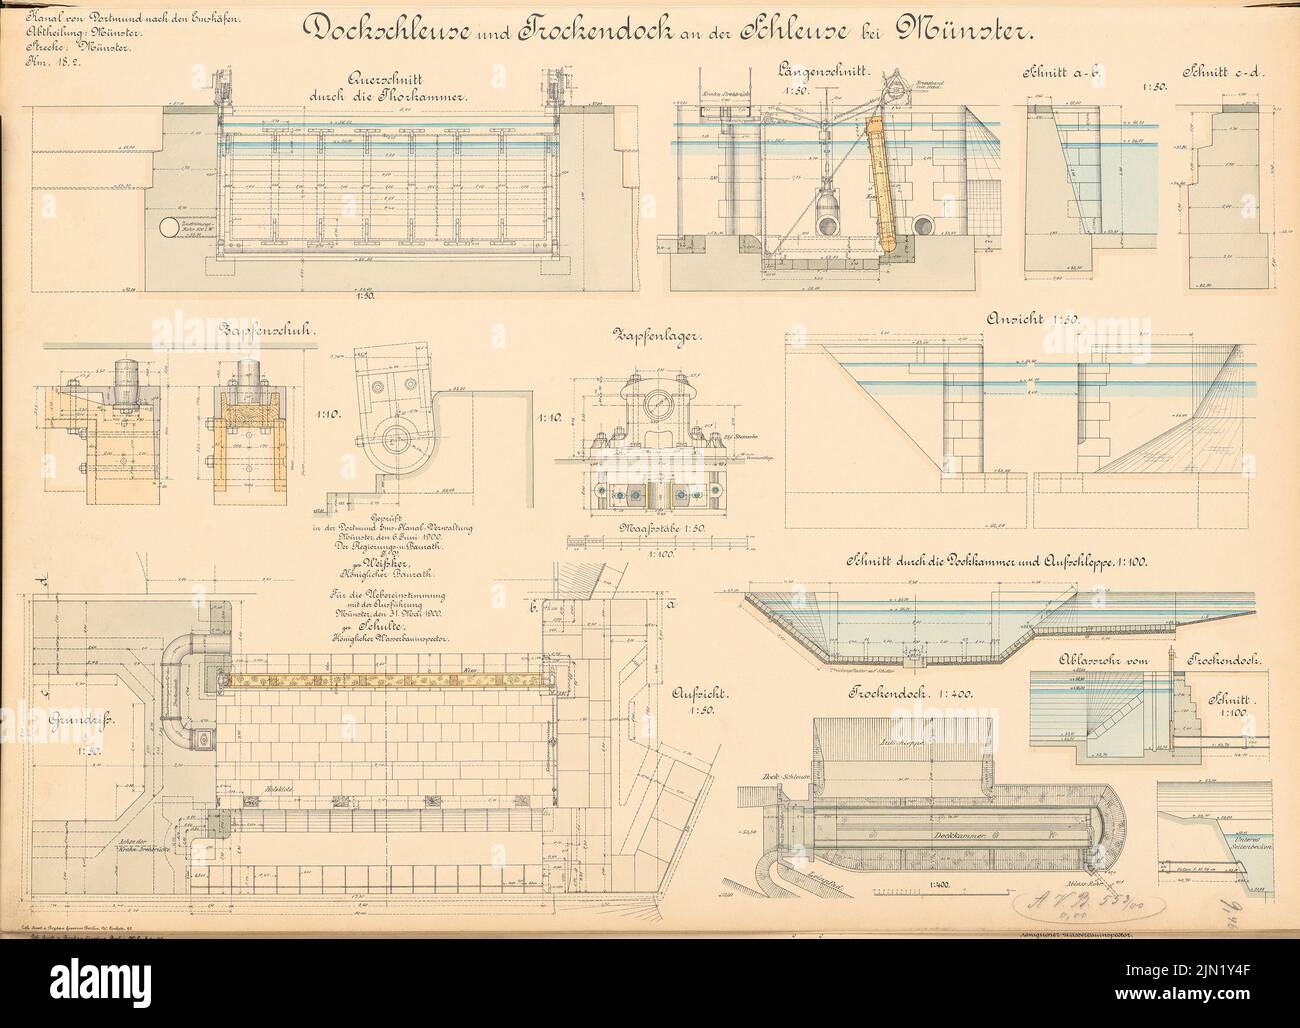 N.N., Dortmund-Ems-Canal. Dock lock and dry skirt on the lock, Münster: supervision, cuts, details 1: 400, 1: 100, 1:50. Lithograph colored on paper, 51 x 70.7 cm (including scan edges) N.N. : Dortmund-Ems-Kanal. Dockschleuse und Trockendrock an der Schleuse, Münster Stock Photo